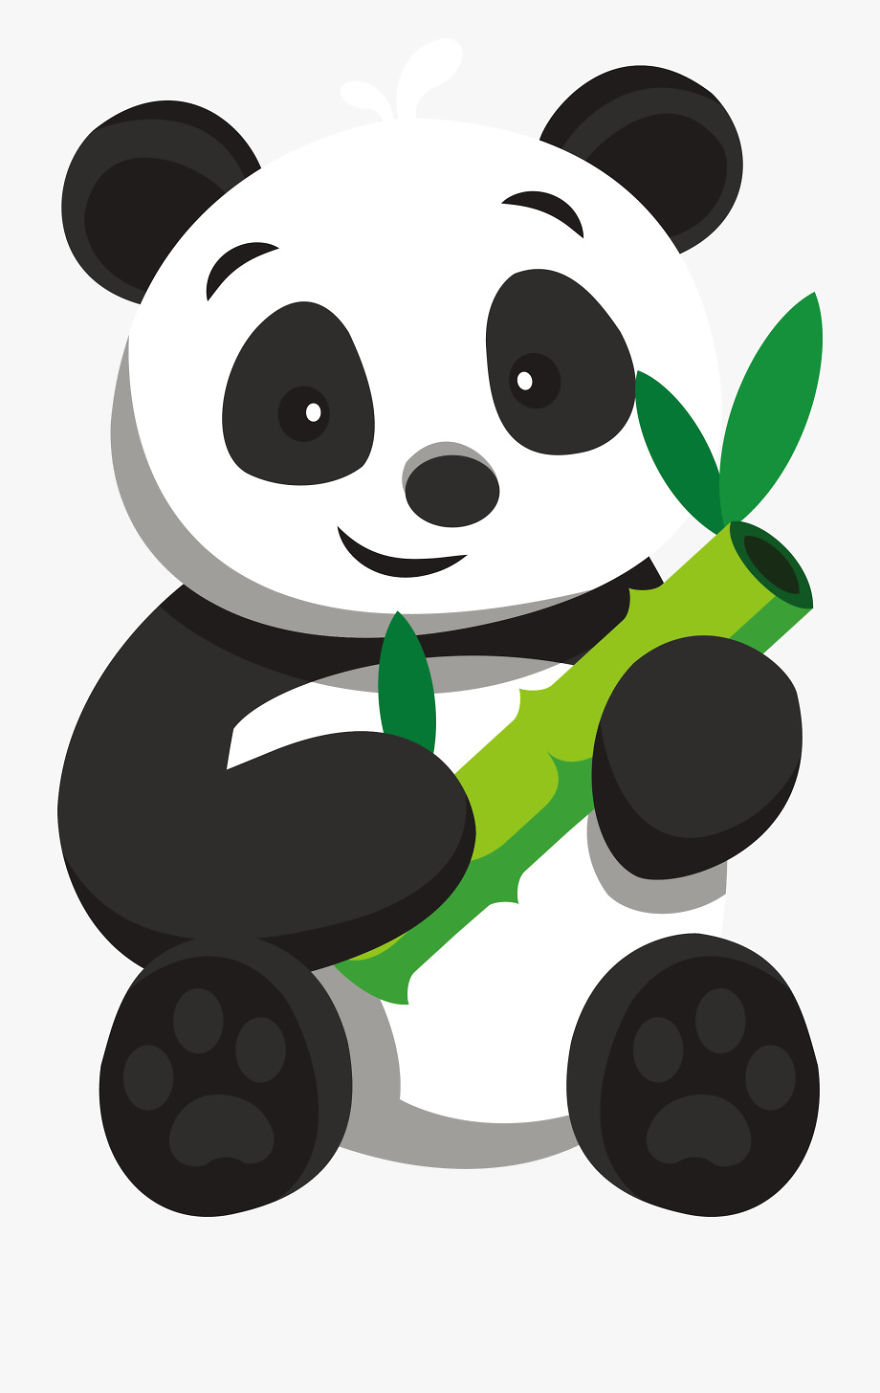 Hey Panda’s, Who Is Your Favourite Singer Or Music Group And Genre?